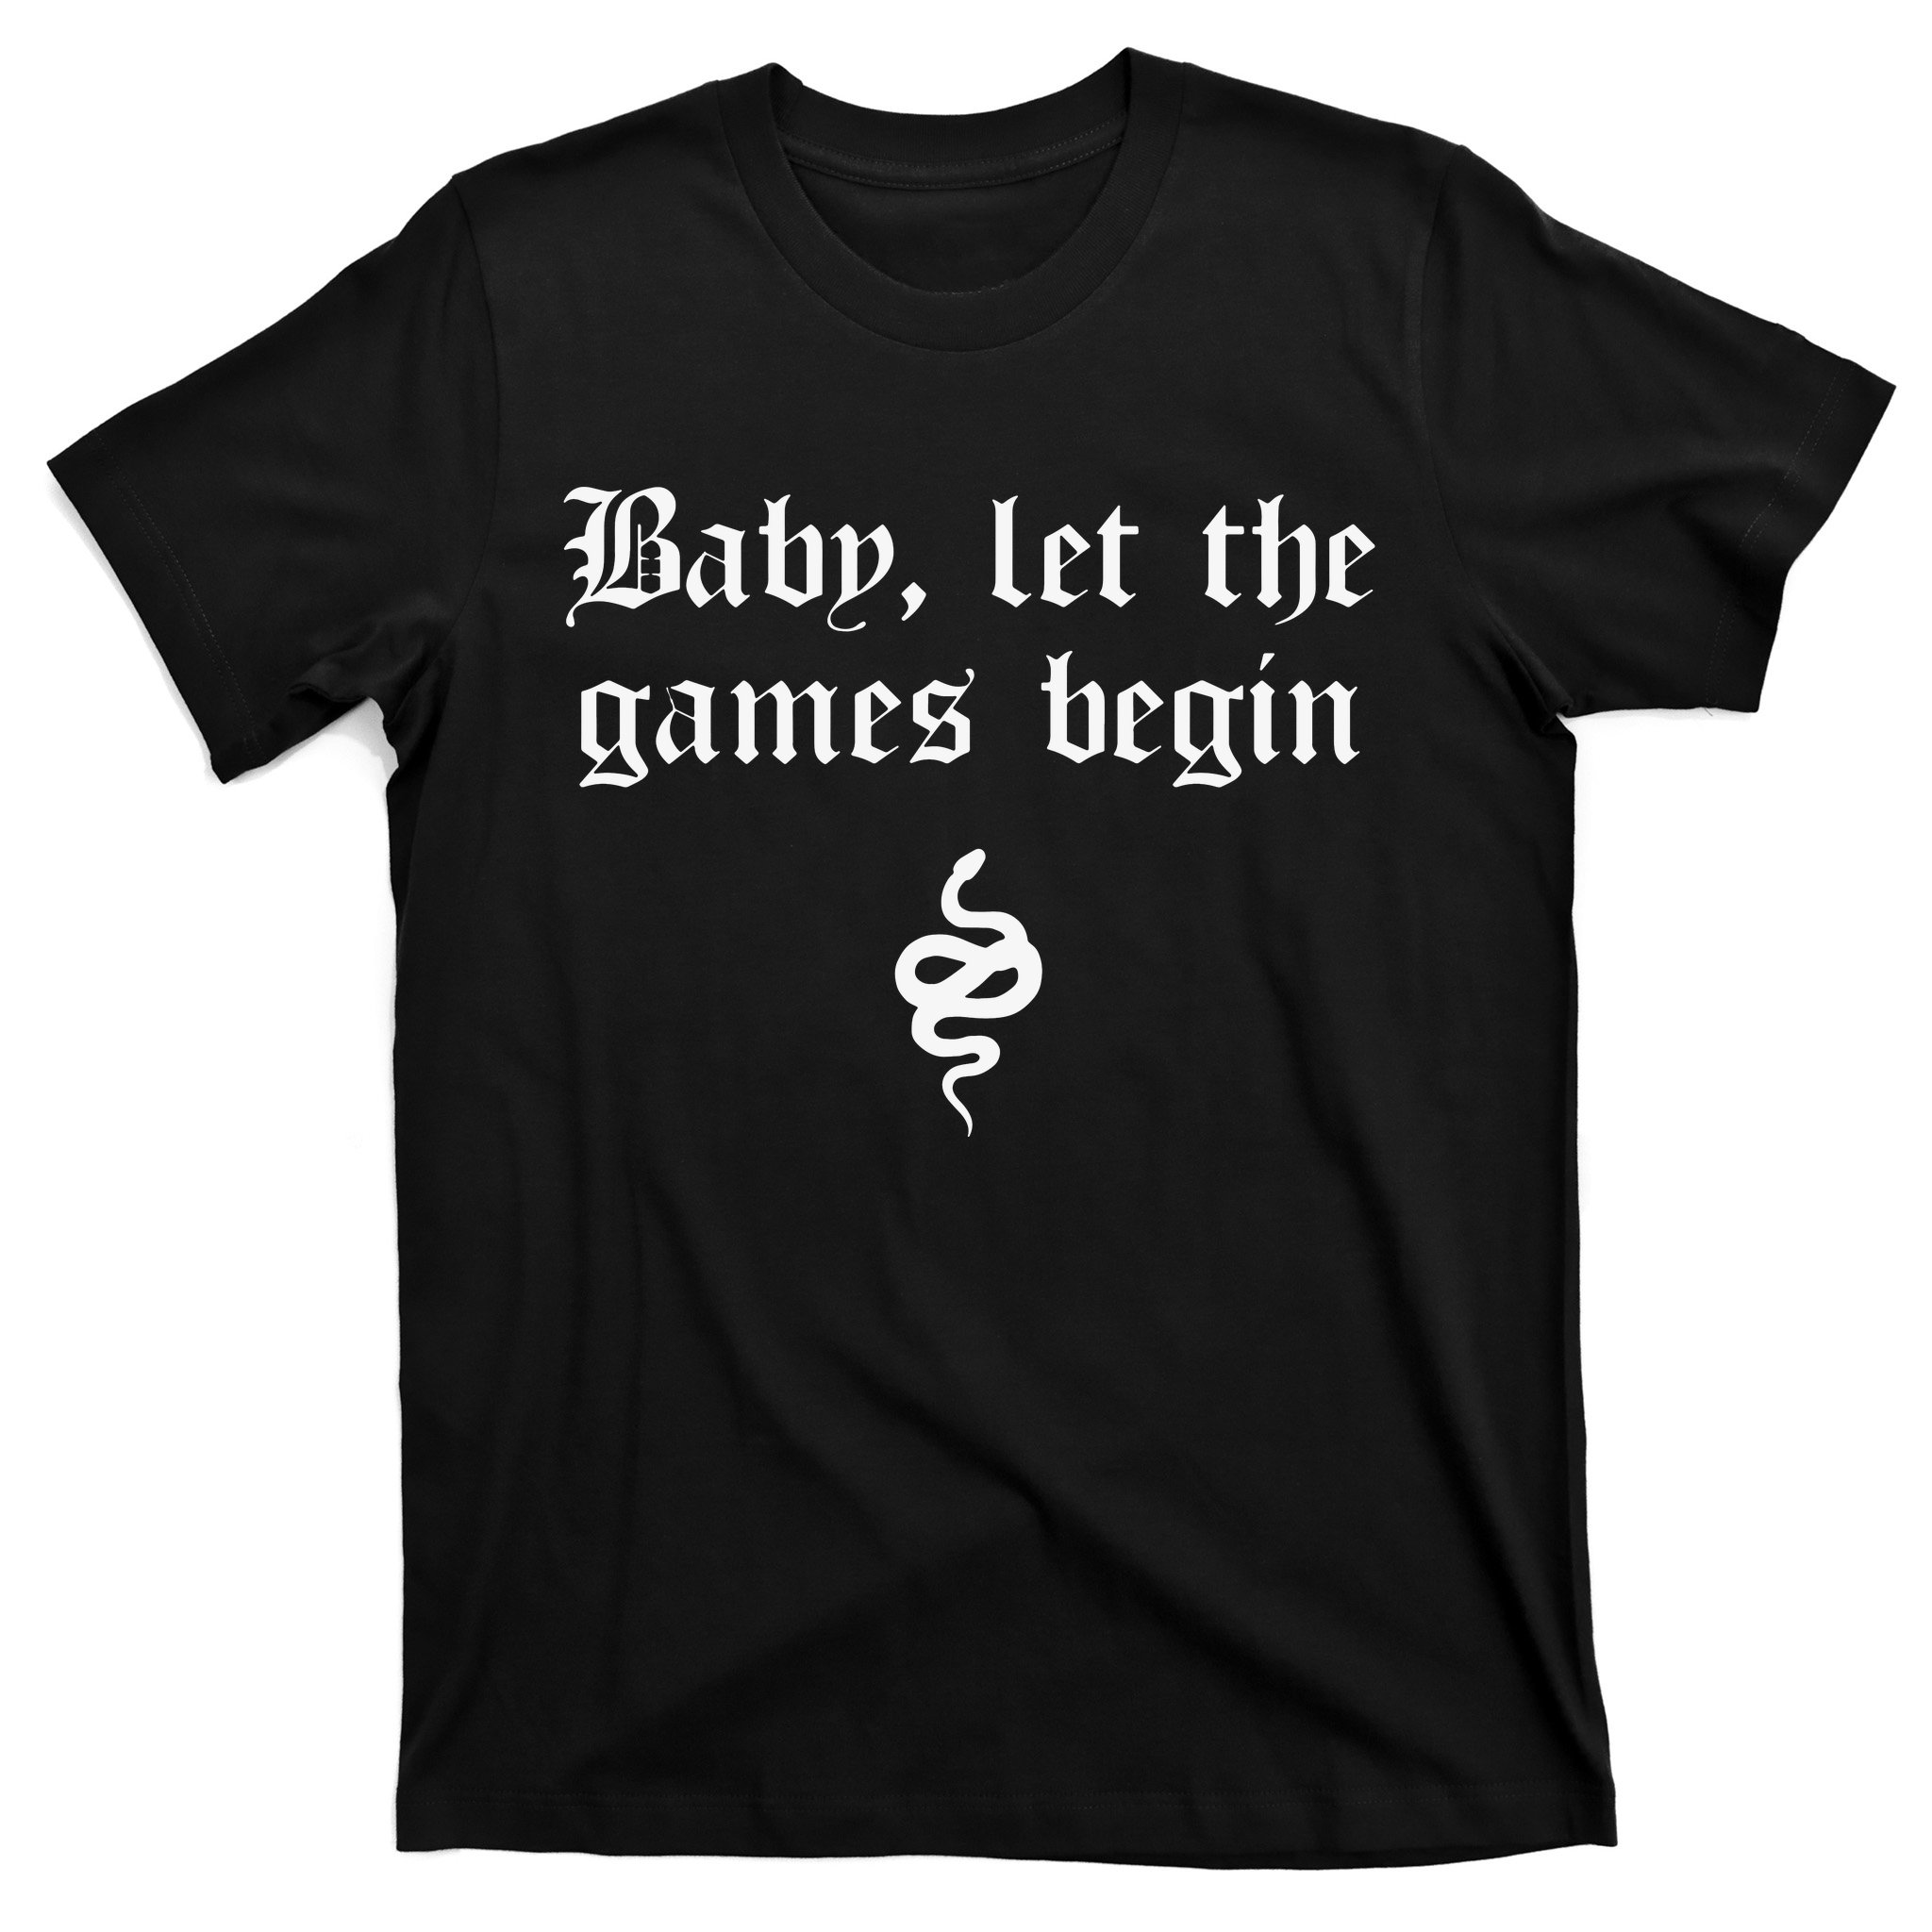  Let the Games Begin T-Shirt : Clothing, Shoes & Jewelry